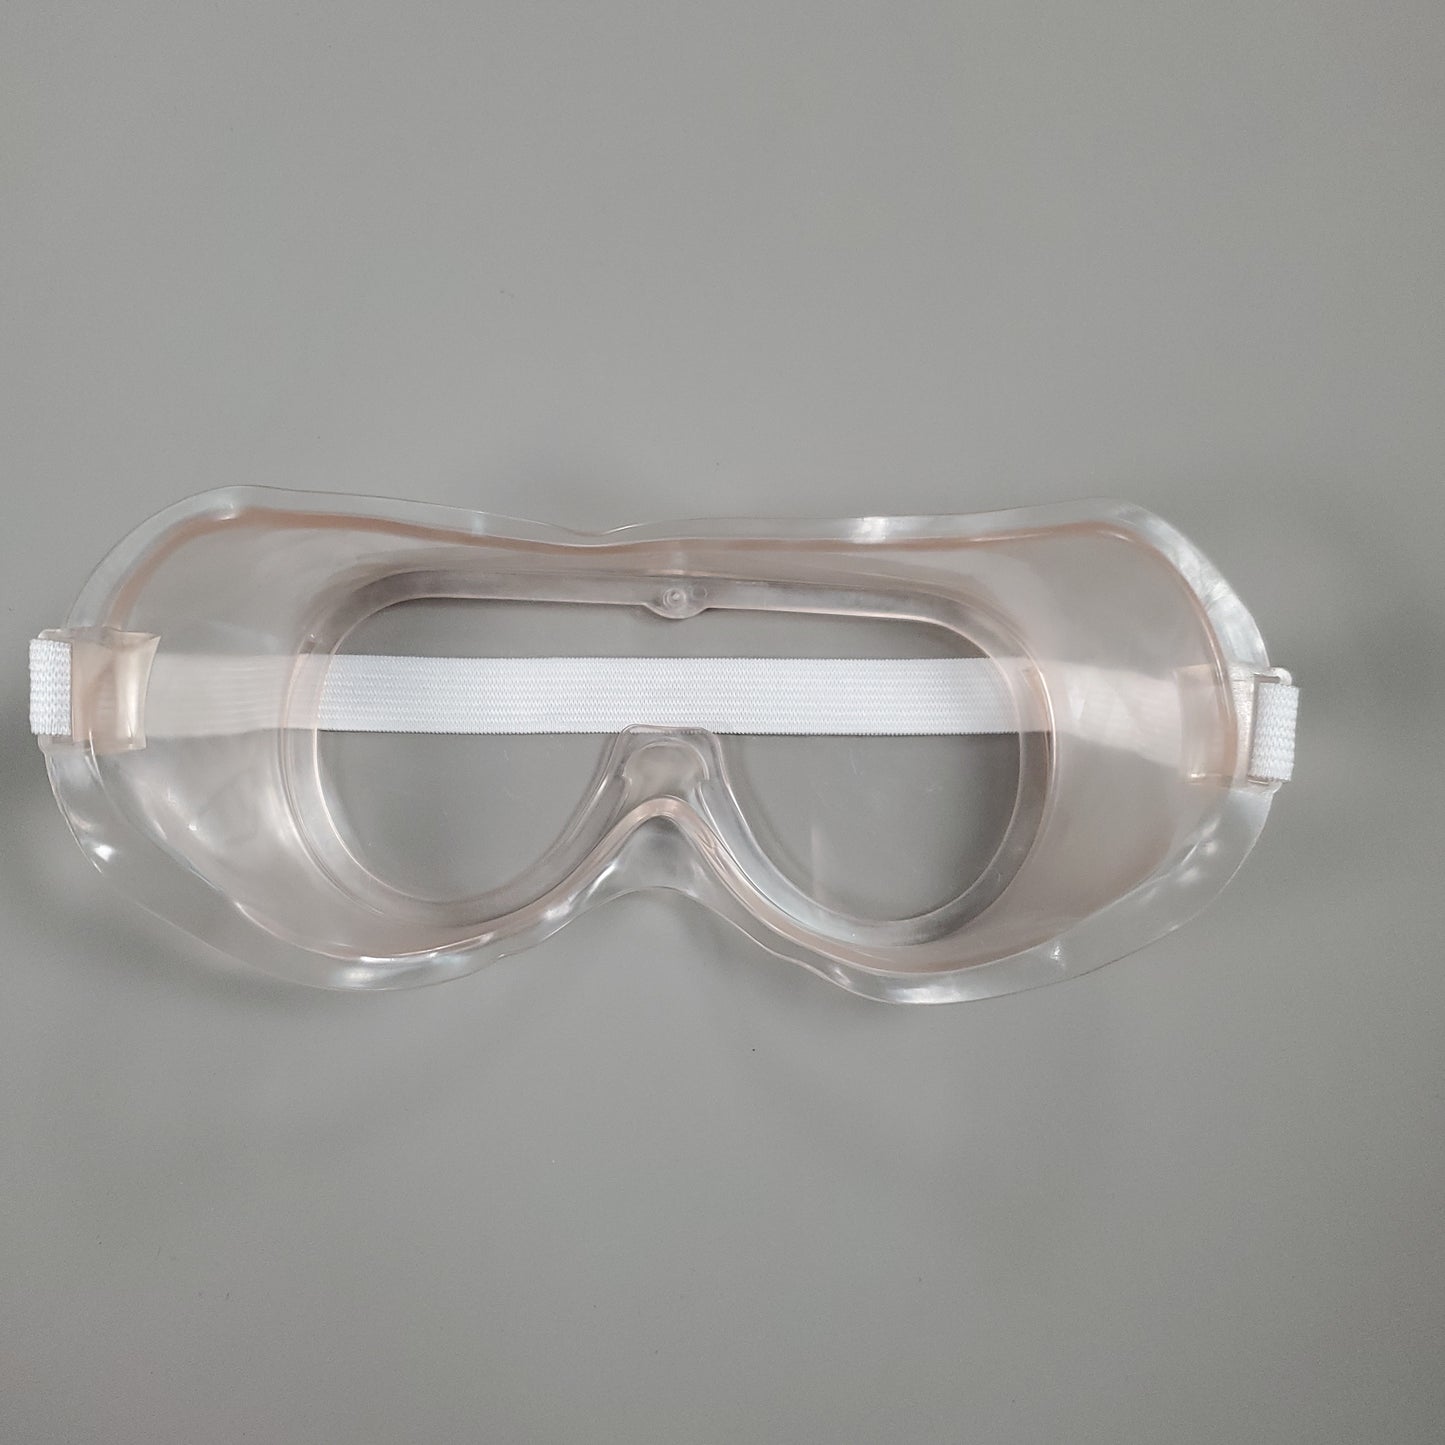 Lot of 10 Lab Safety Goggles Eye Protection Clear Glasses Isolation (New Other)